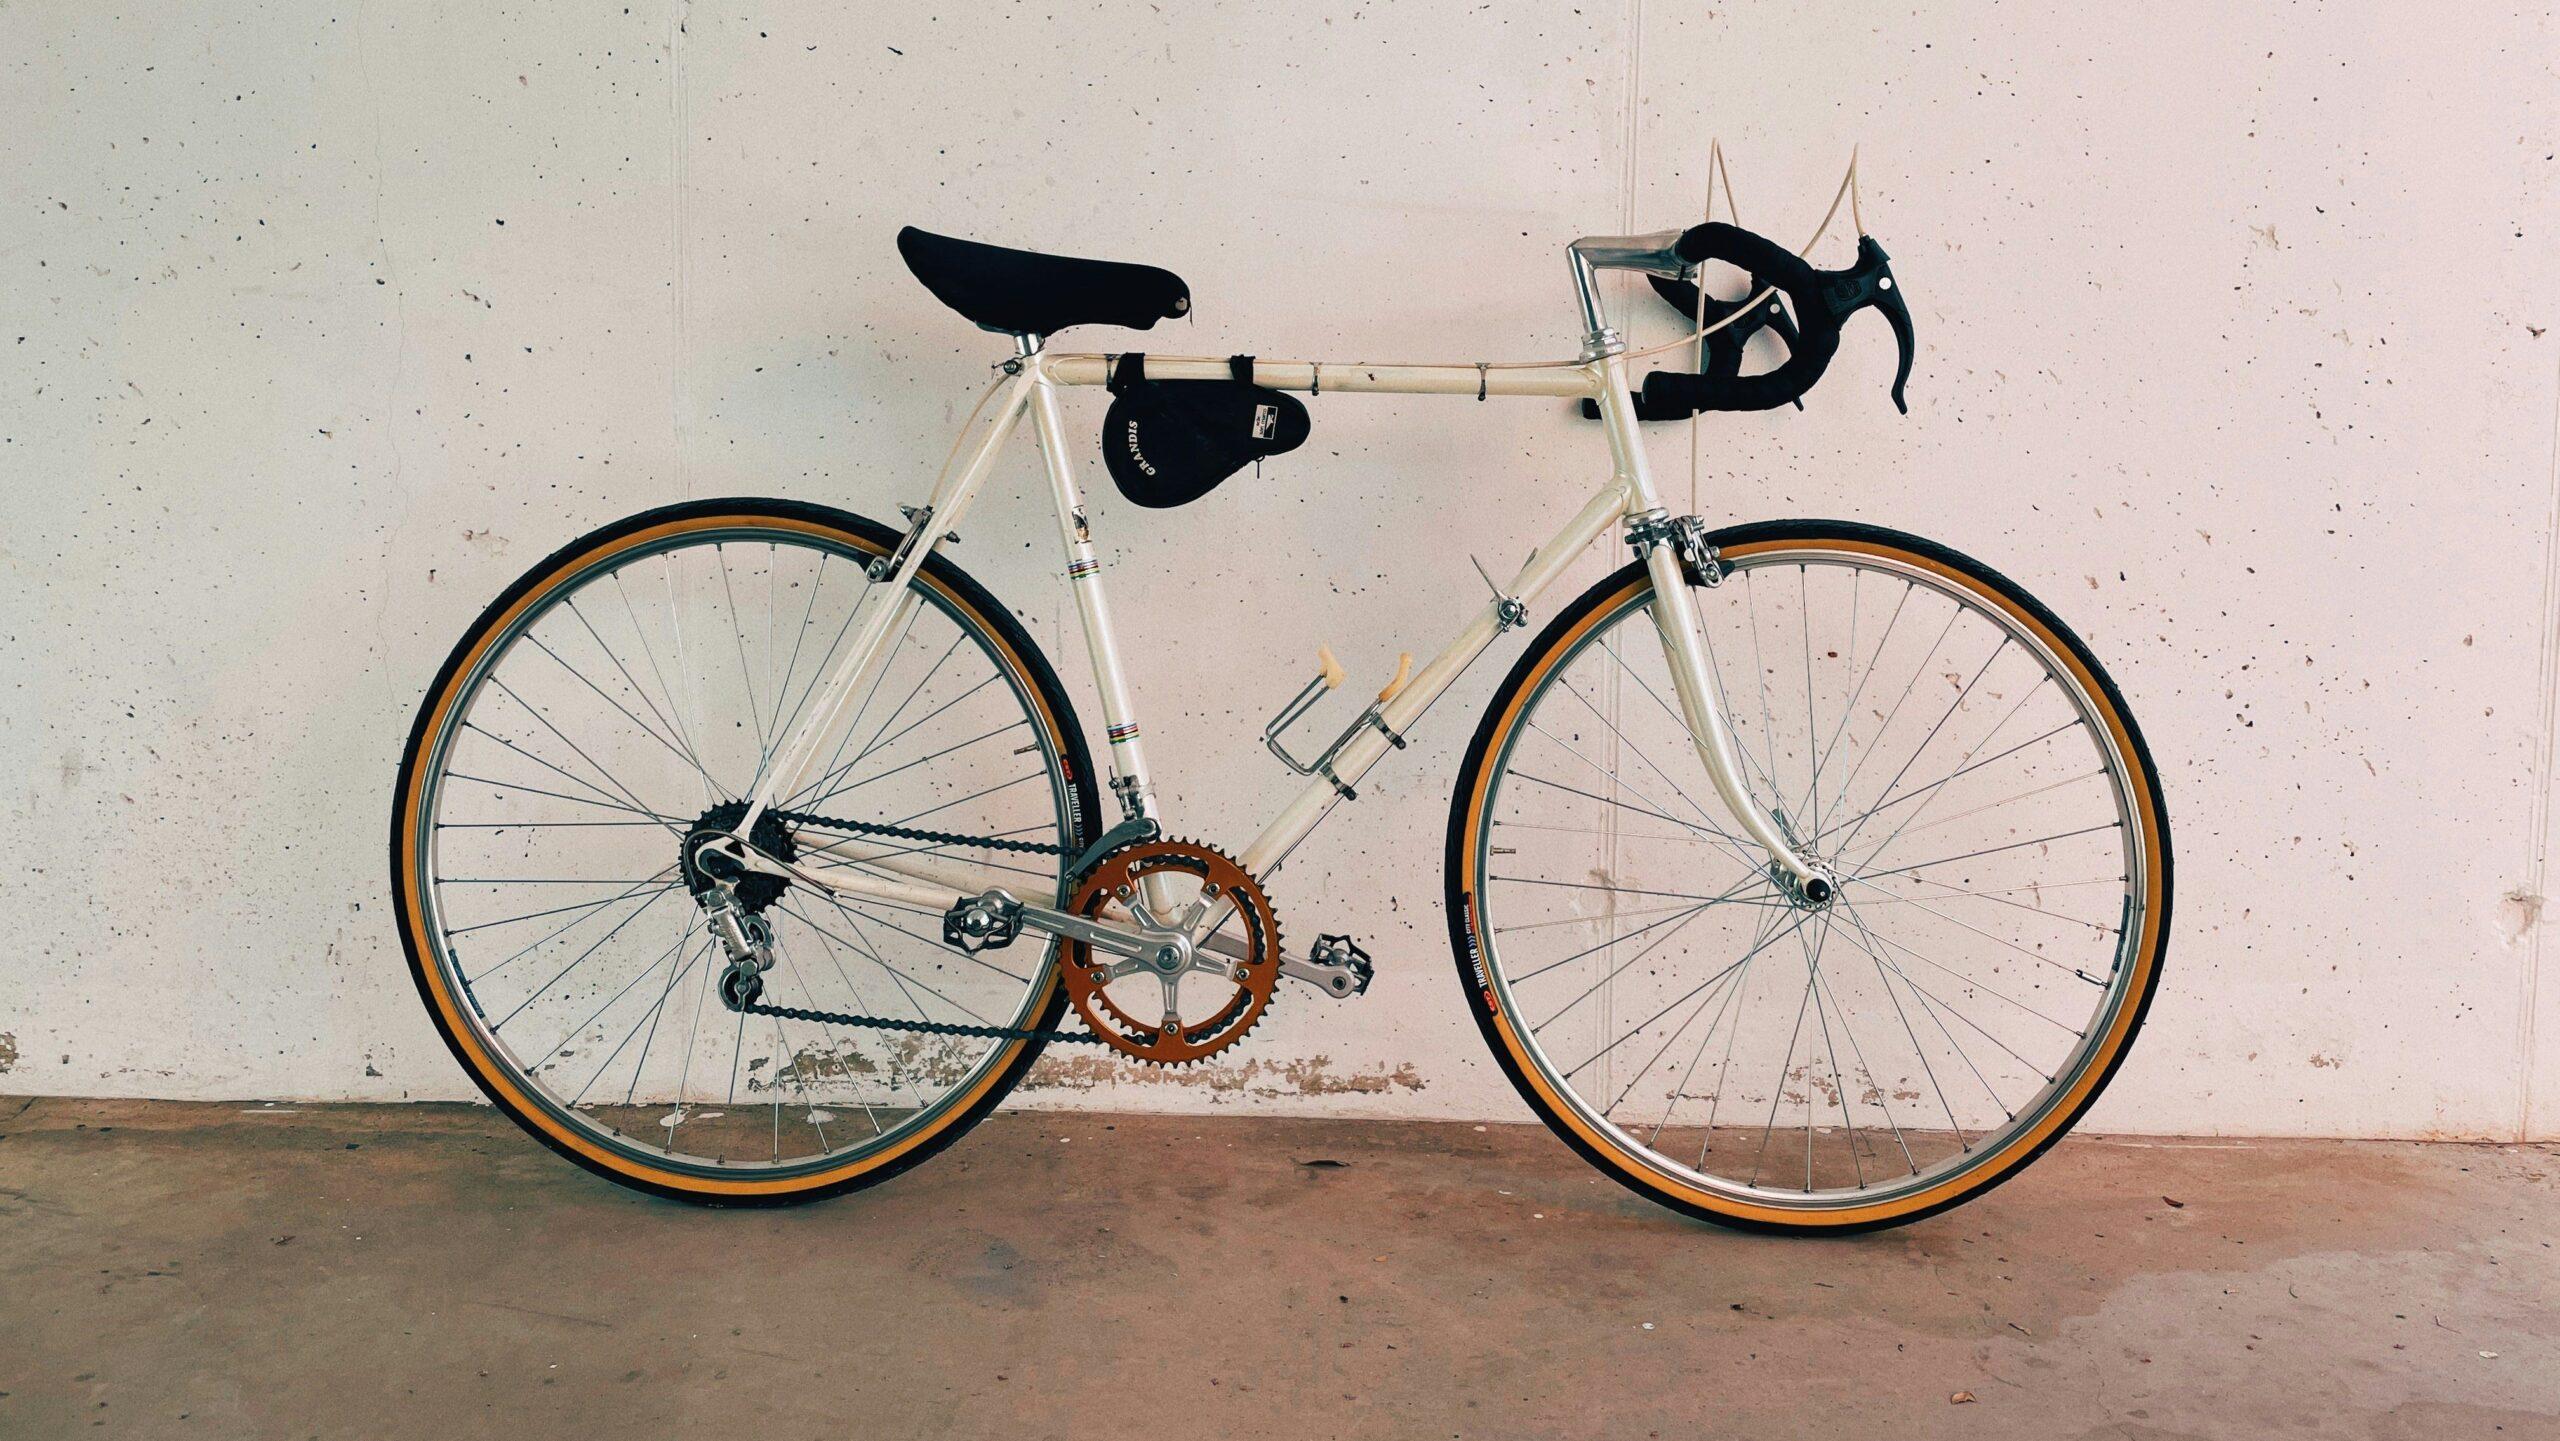 A white Campagnolo bike leaning up against a white wall.